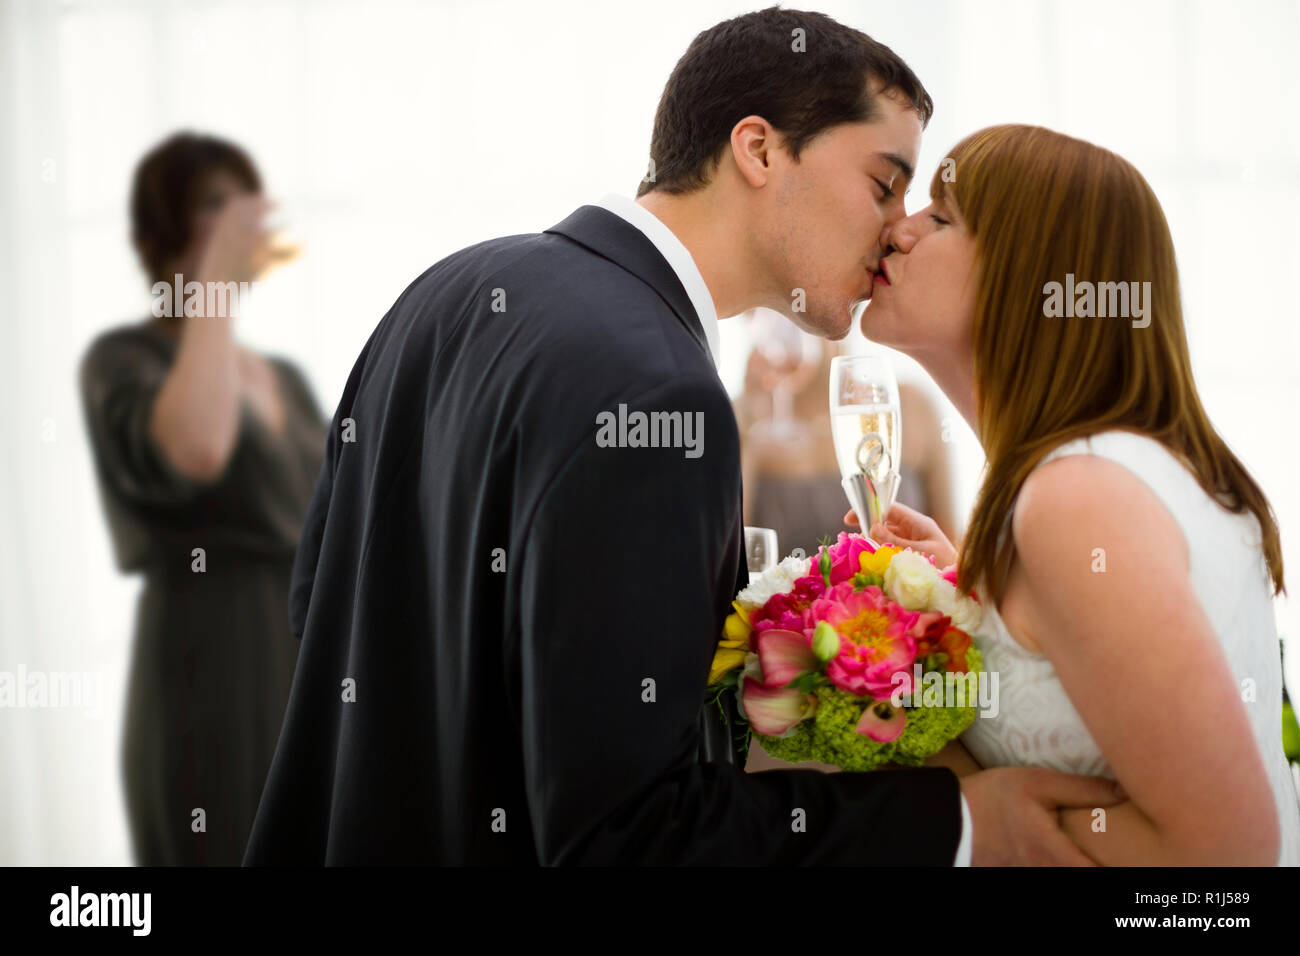 Bride and groom kissing at wedding reception. Stock Photo